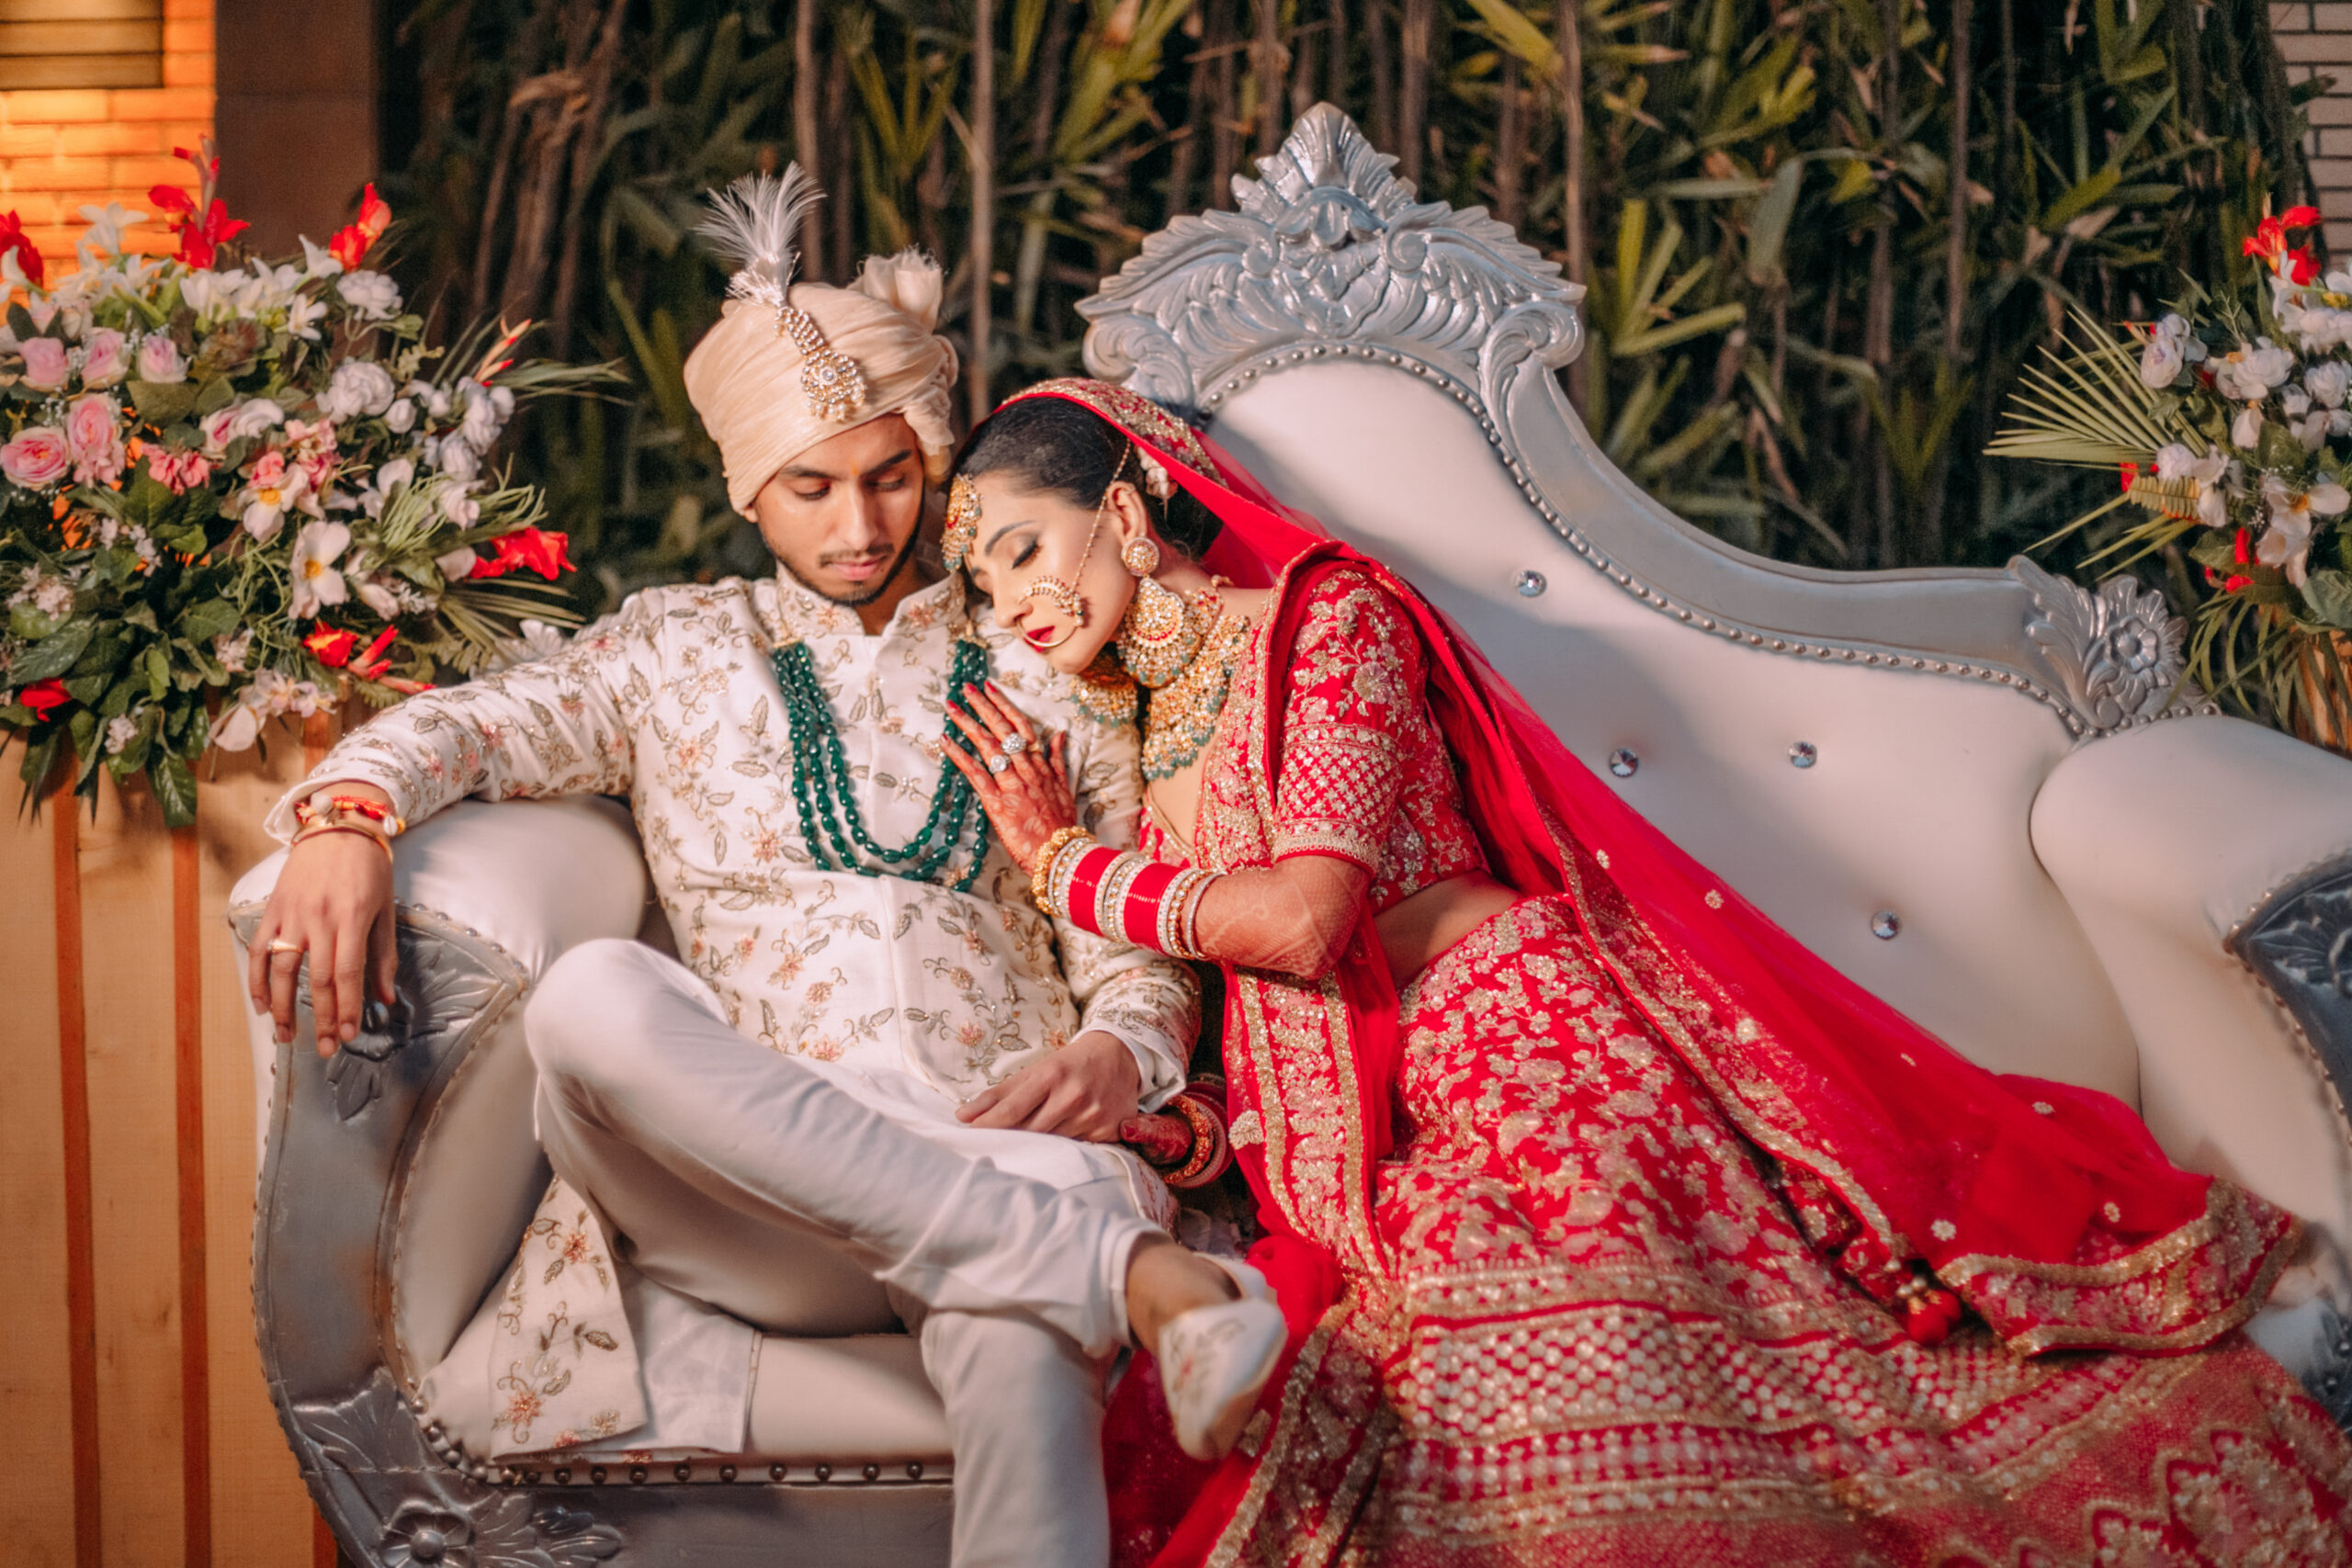 Pin by Hasin bano on Photography | Latest bridal dresses, Indian wedding  couple photography, Bridal photography poses